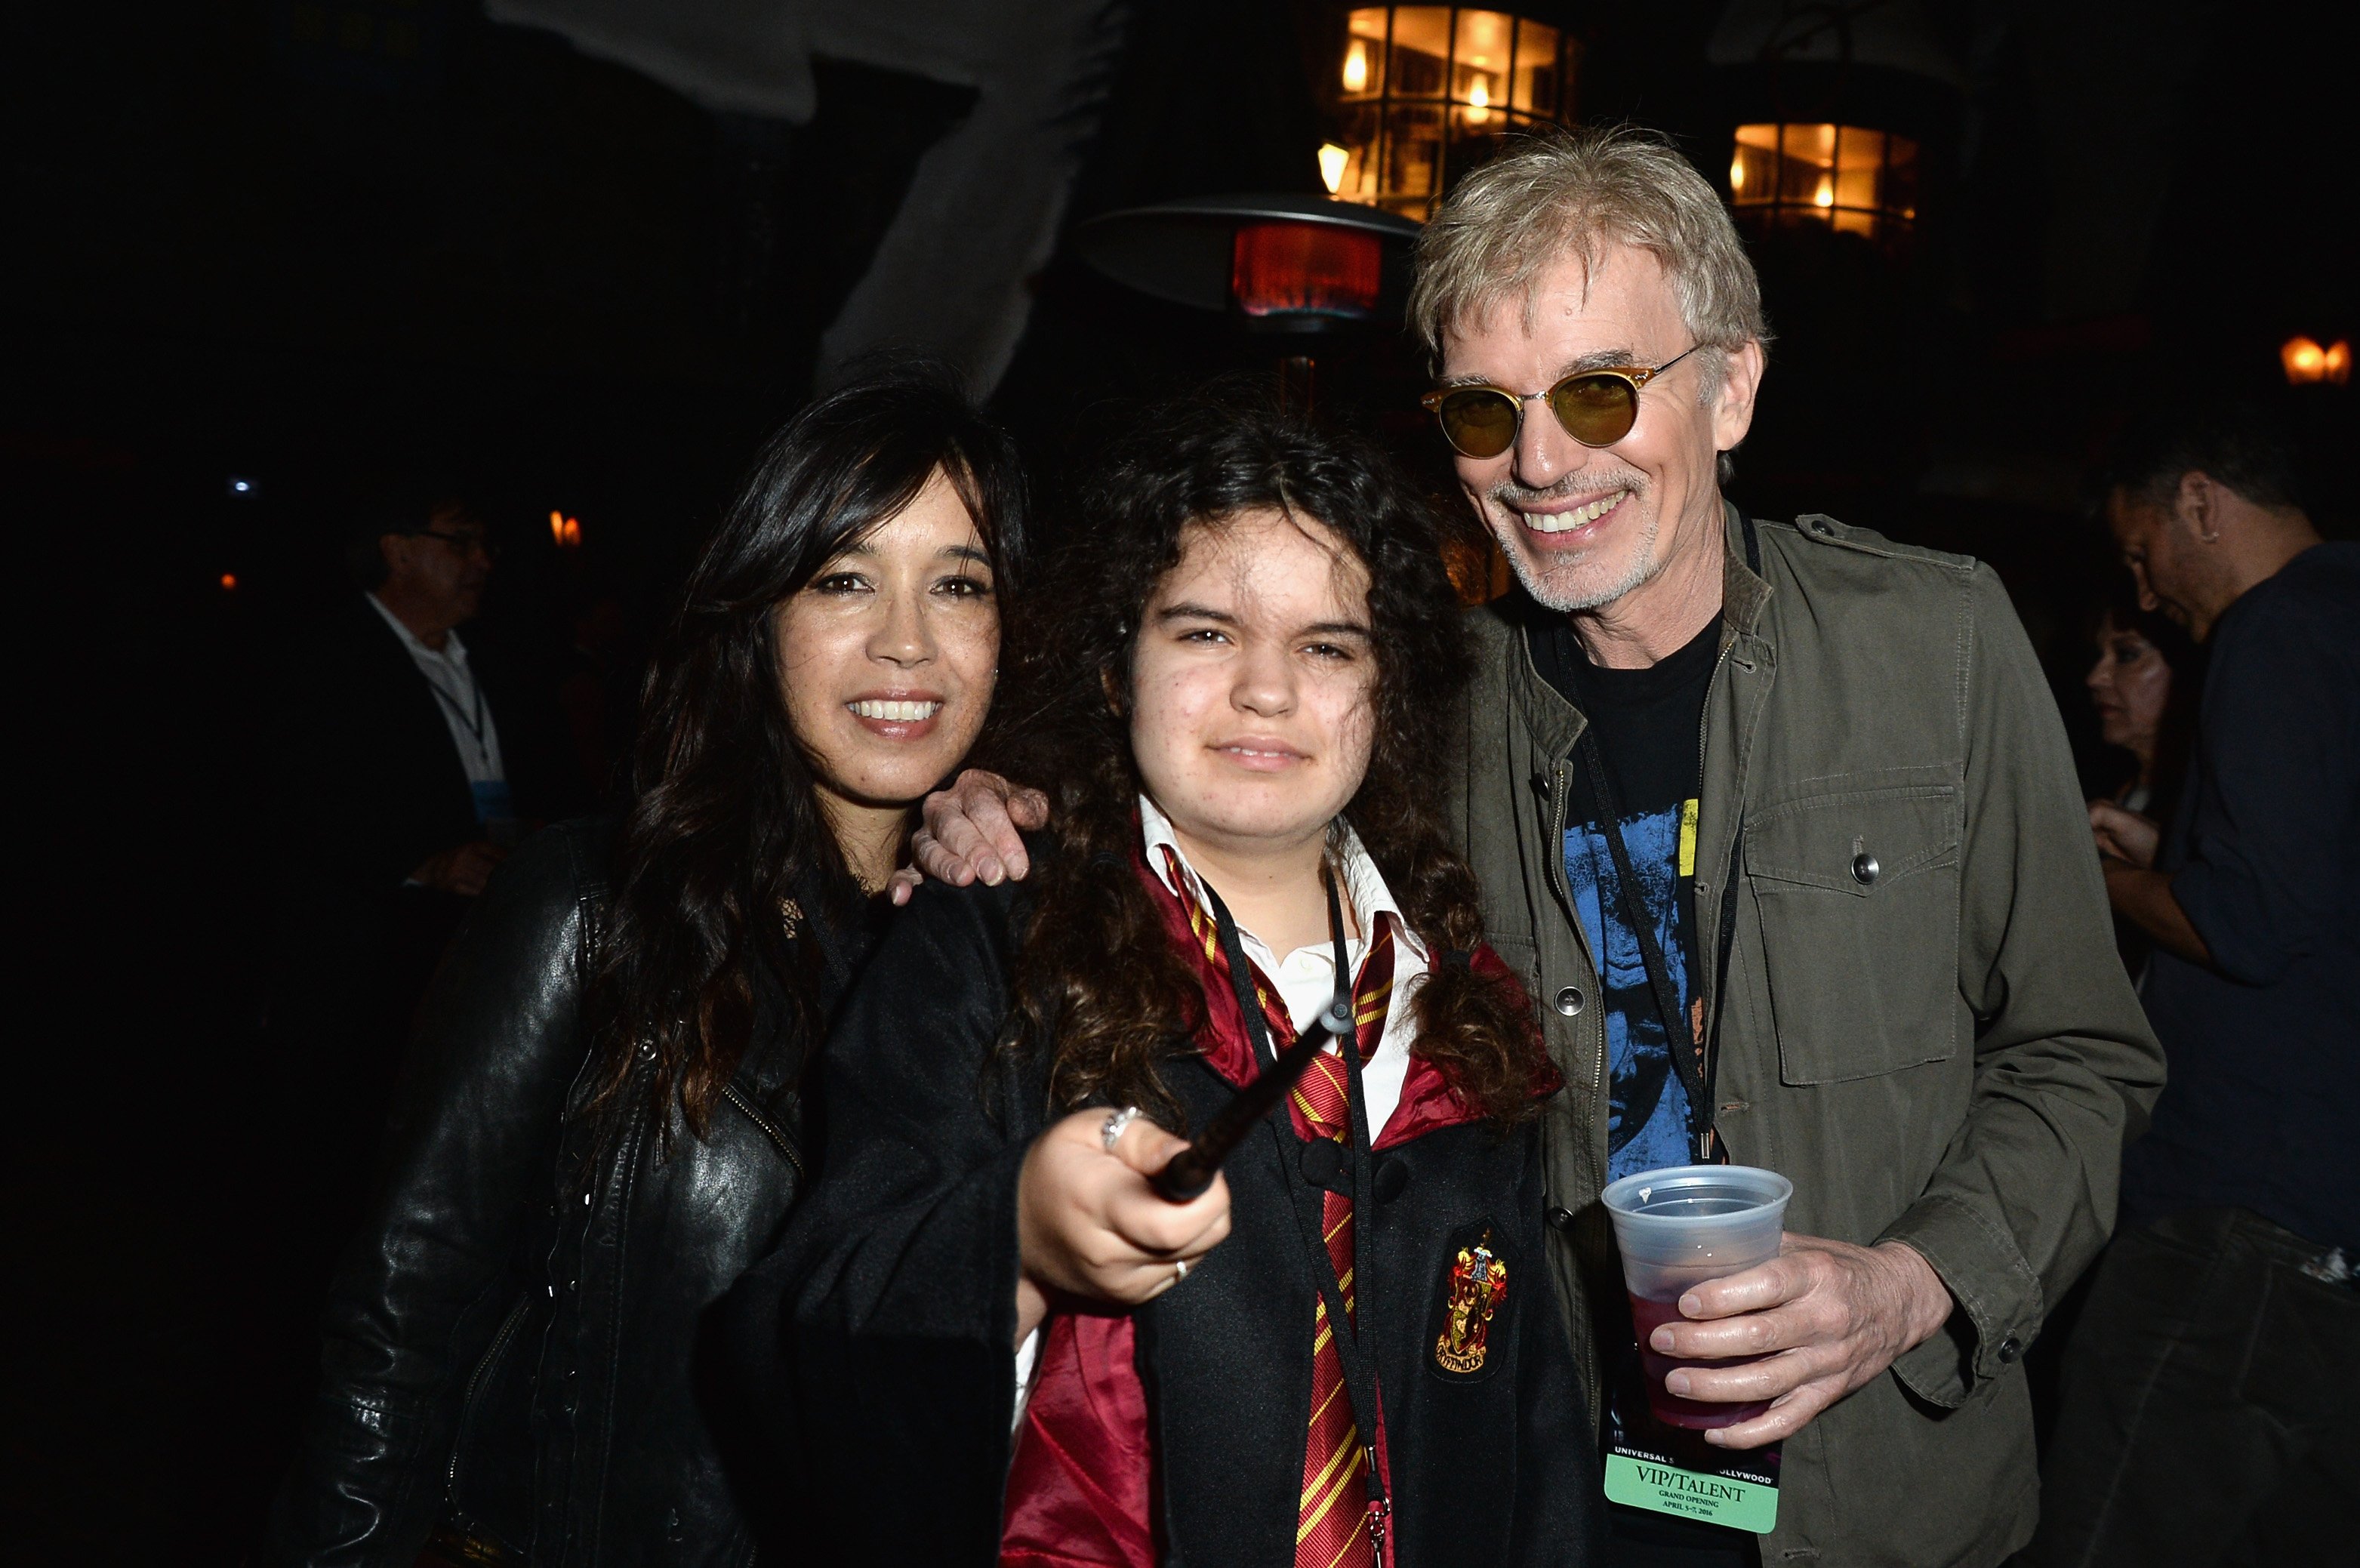 Connie Angland, Bella Thornton, and Billy Bob Thornton at the "Wizarding World of Harry Potter" launch at Universal Studios Hollywood on April 5, 2016, in Universal City, California. | Source: Getty Images